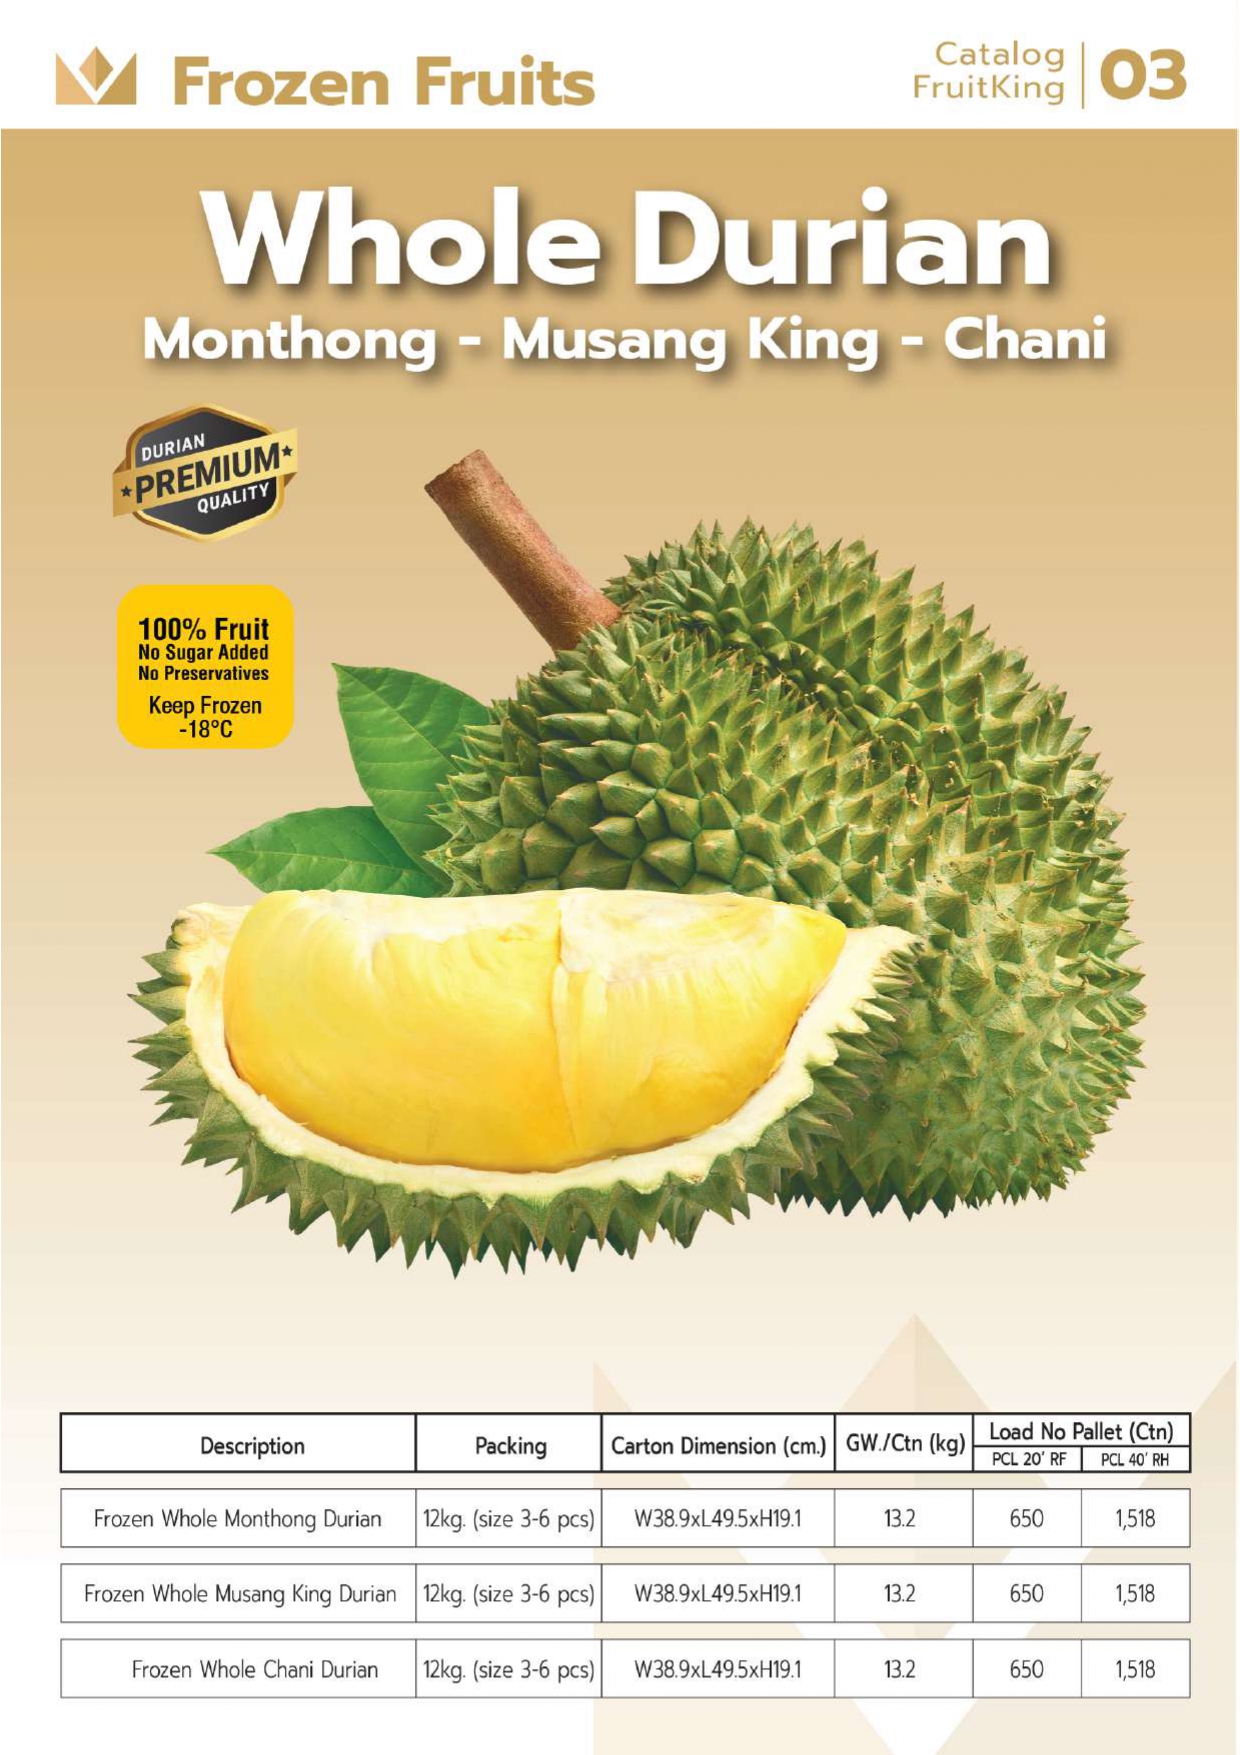 Whole Durian